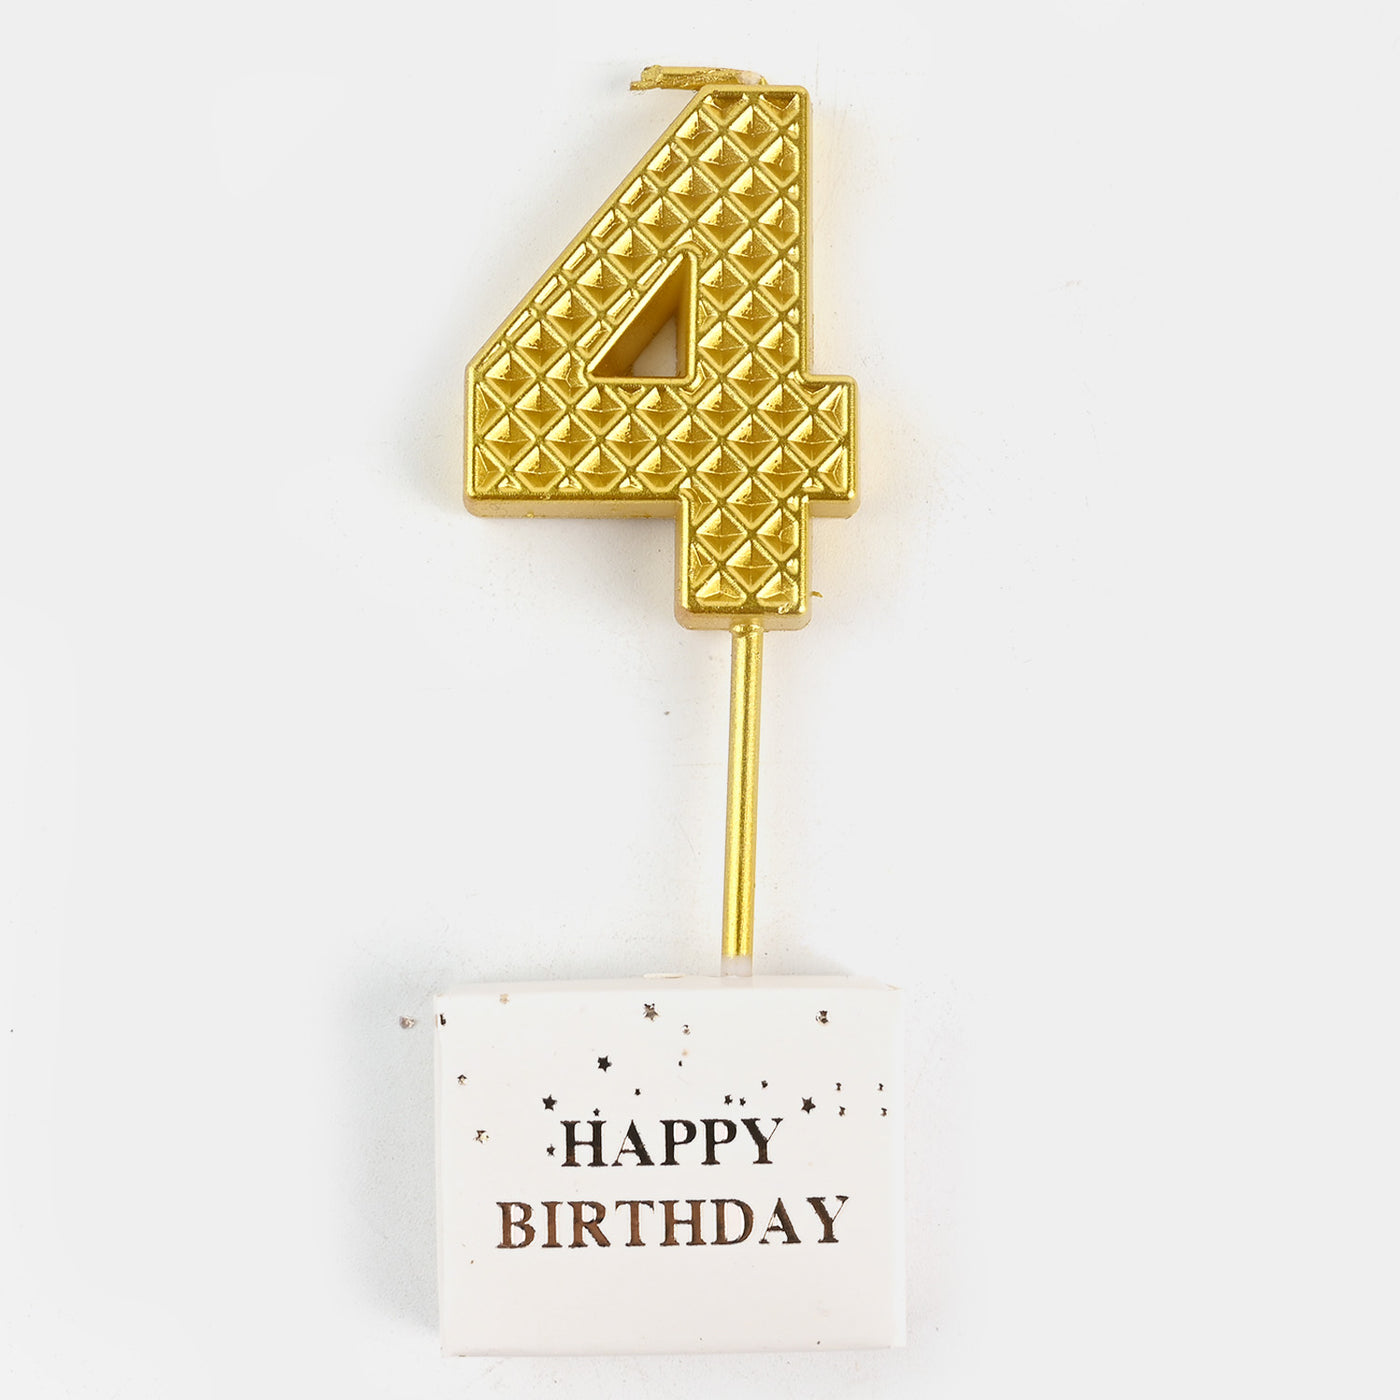 Happy Birthday Cake Topper Decoration for Party | 4